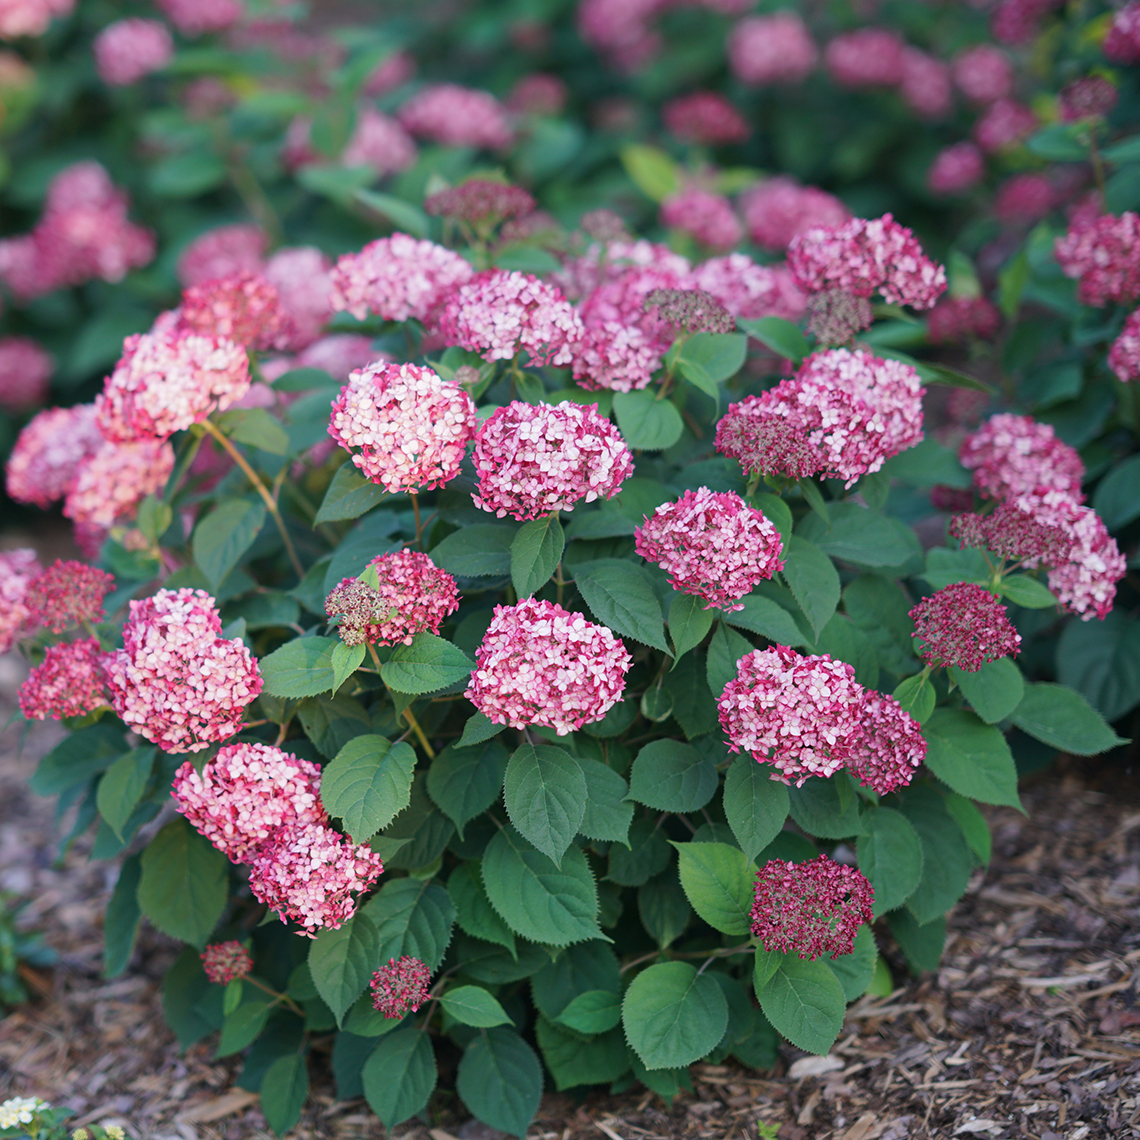 Invincibelle Ruby hydrangeea covered in deep pink blooms in the landscape